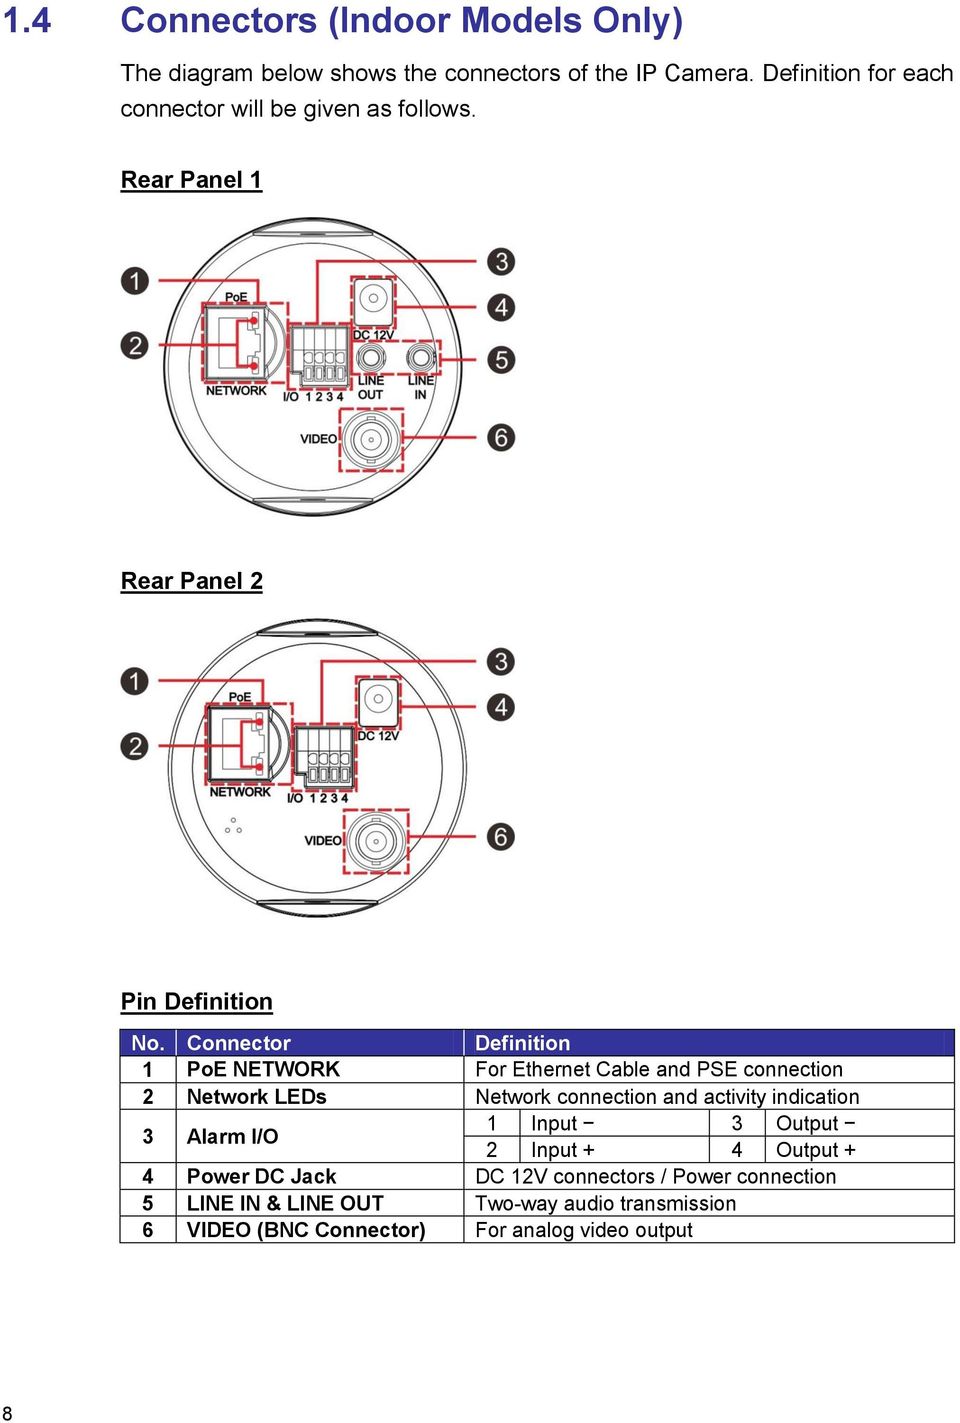 Connector Definition 1 PoE NETWORK For Ethernet Cable and PSE connection 2 Network LEDs Network connection and activity indication